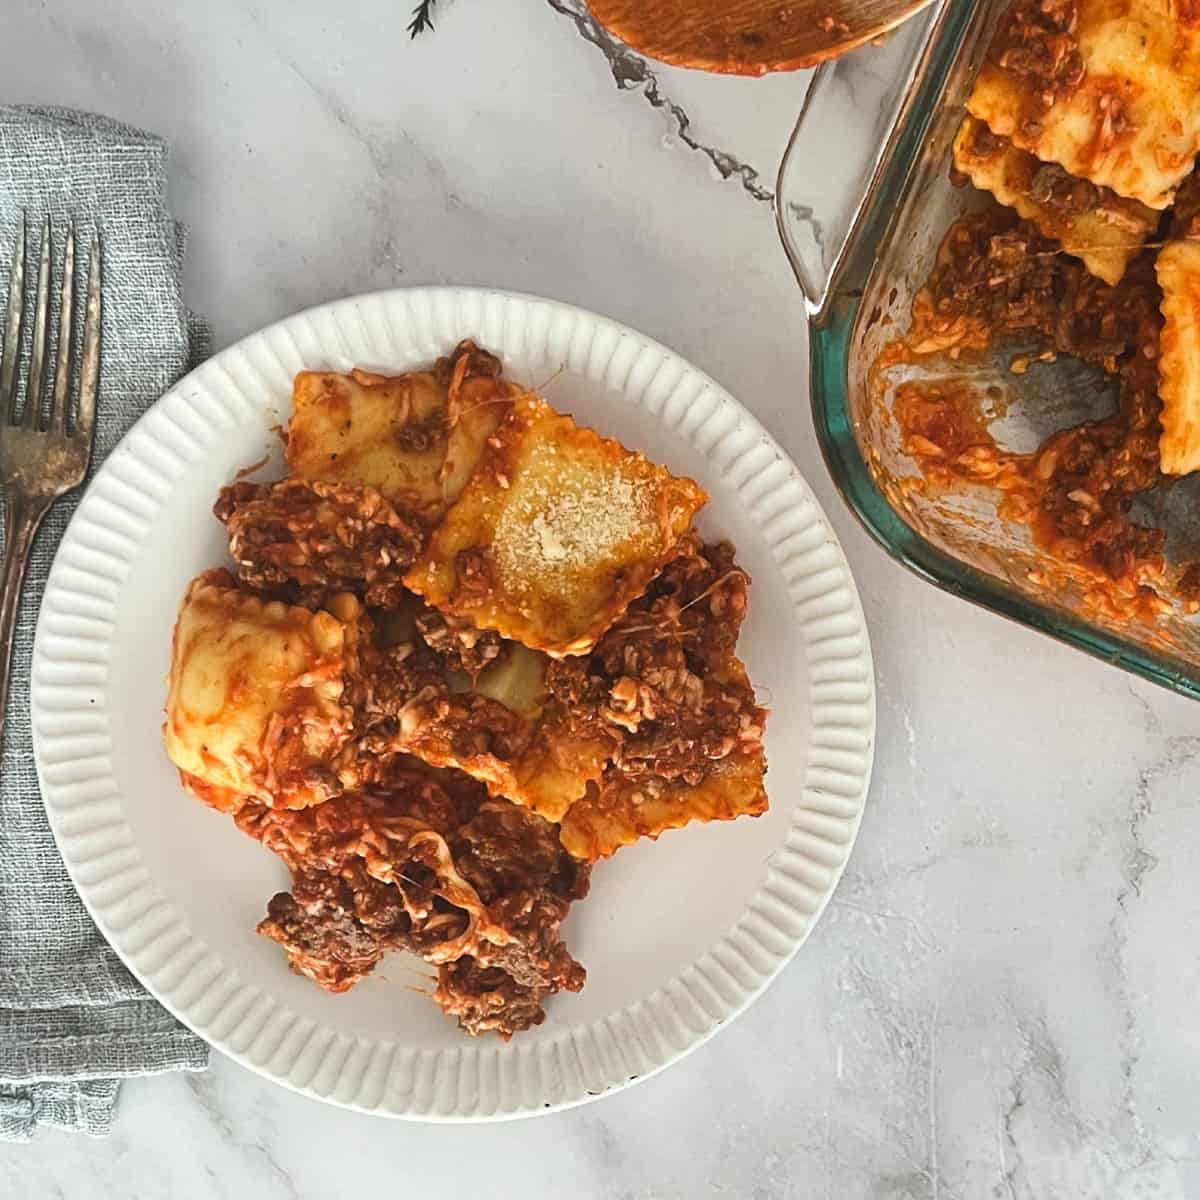 A plate of ravioli bake with meat sauce on a table. The ravioli casserole is on a white plate next to a casserole dish. The casserole dish is filled with ravioli, meat sauce, and melted cheese. The ravioli bake is topped with chopped fresh parsley.